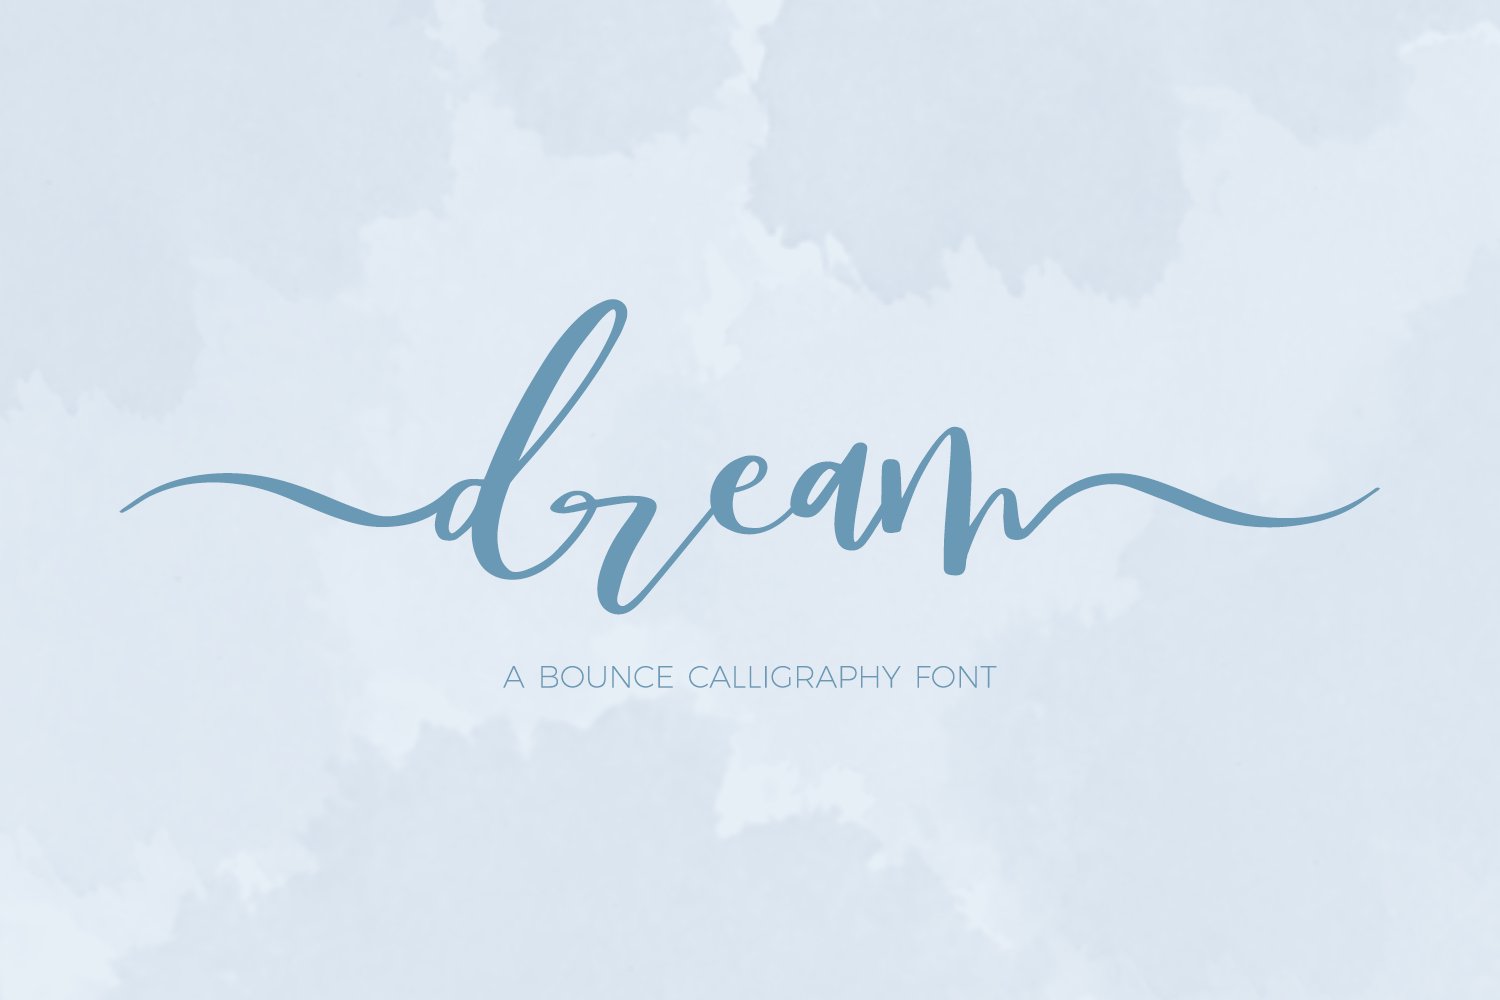 Dream Bounce Calligraphy Font cover image.